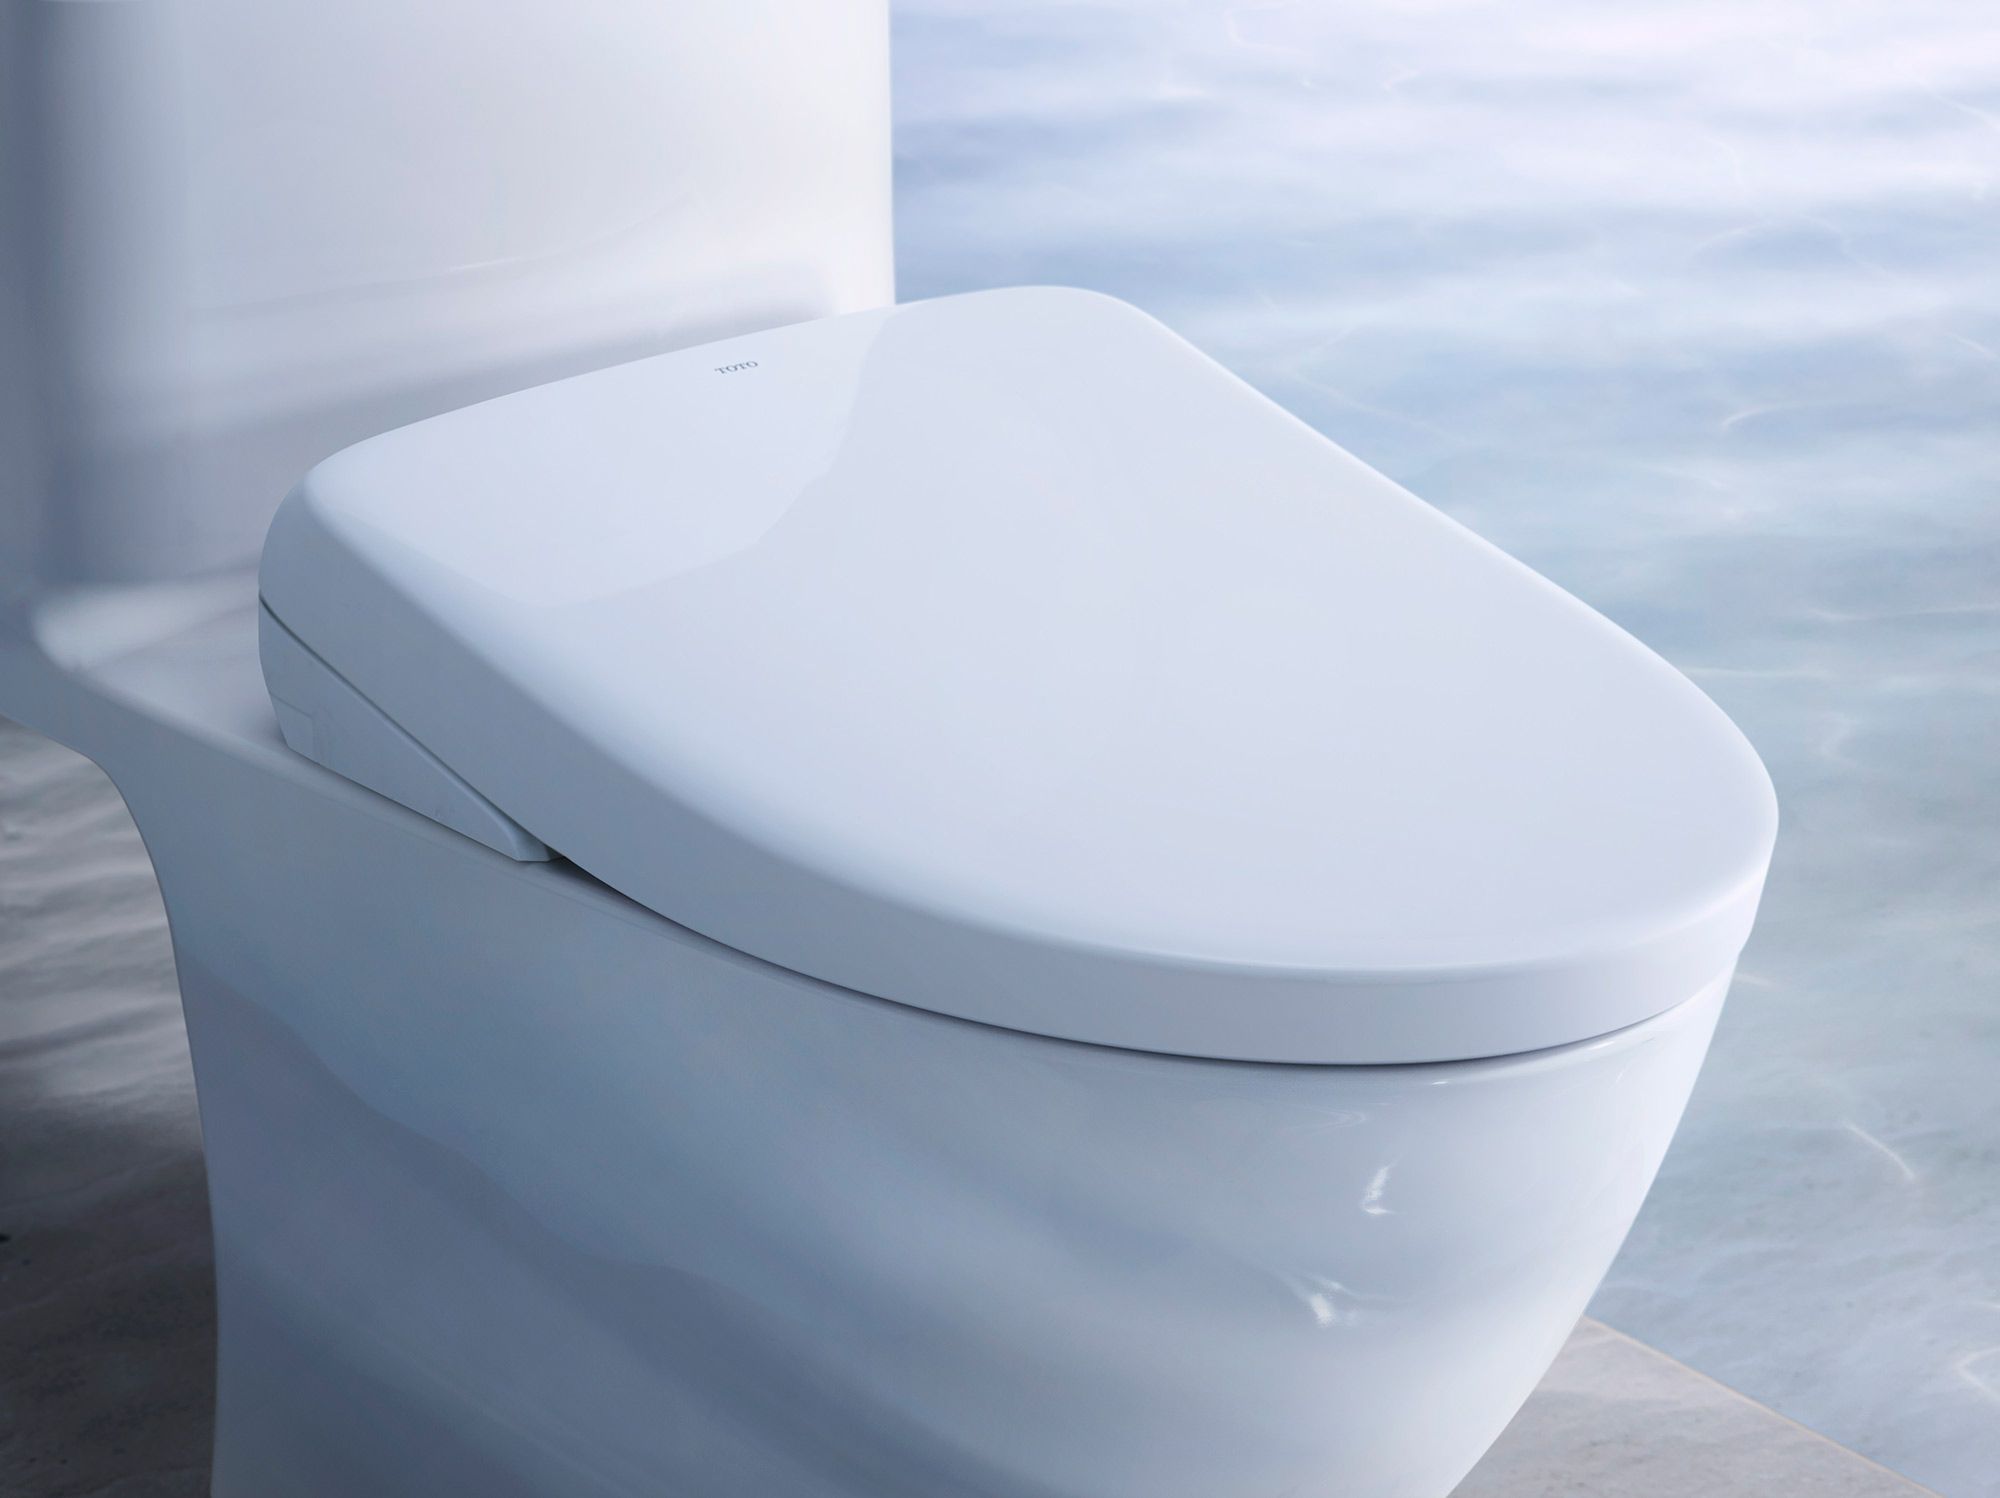 Toto S7A Electronic Bidet Toilet Seat, Contemporary Lid